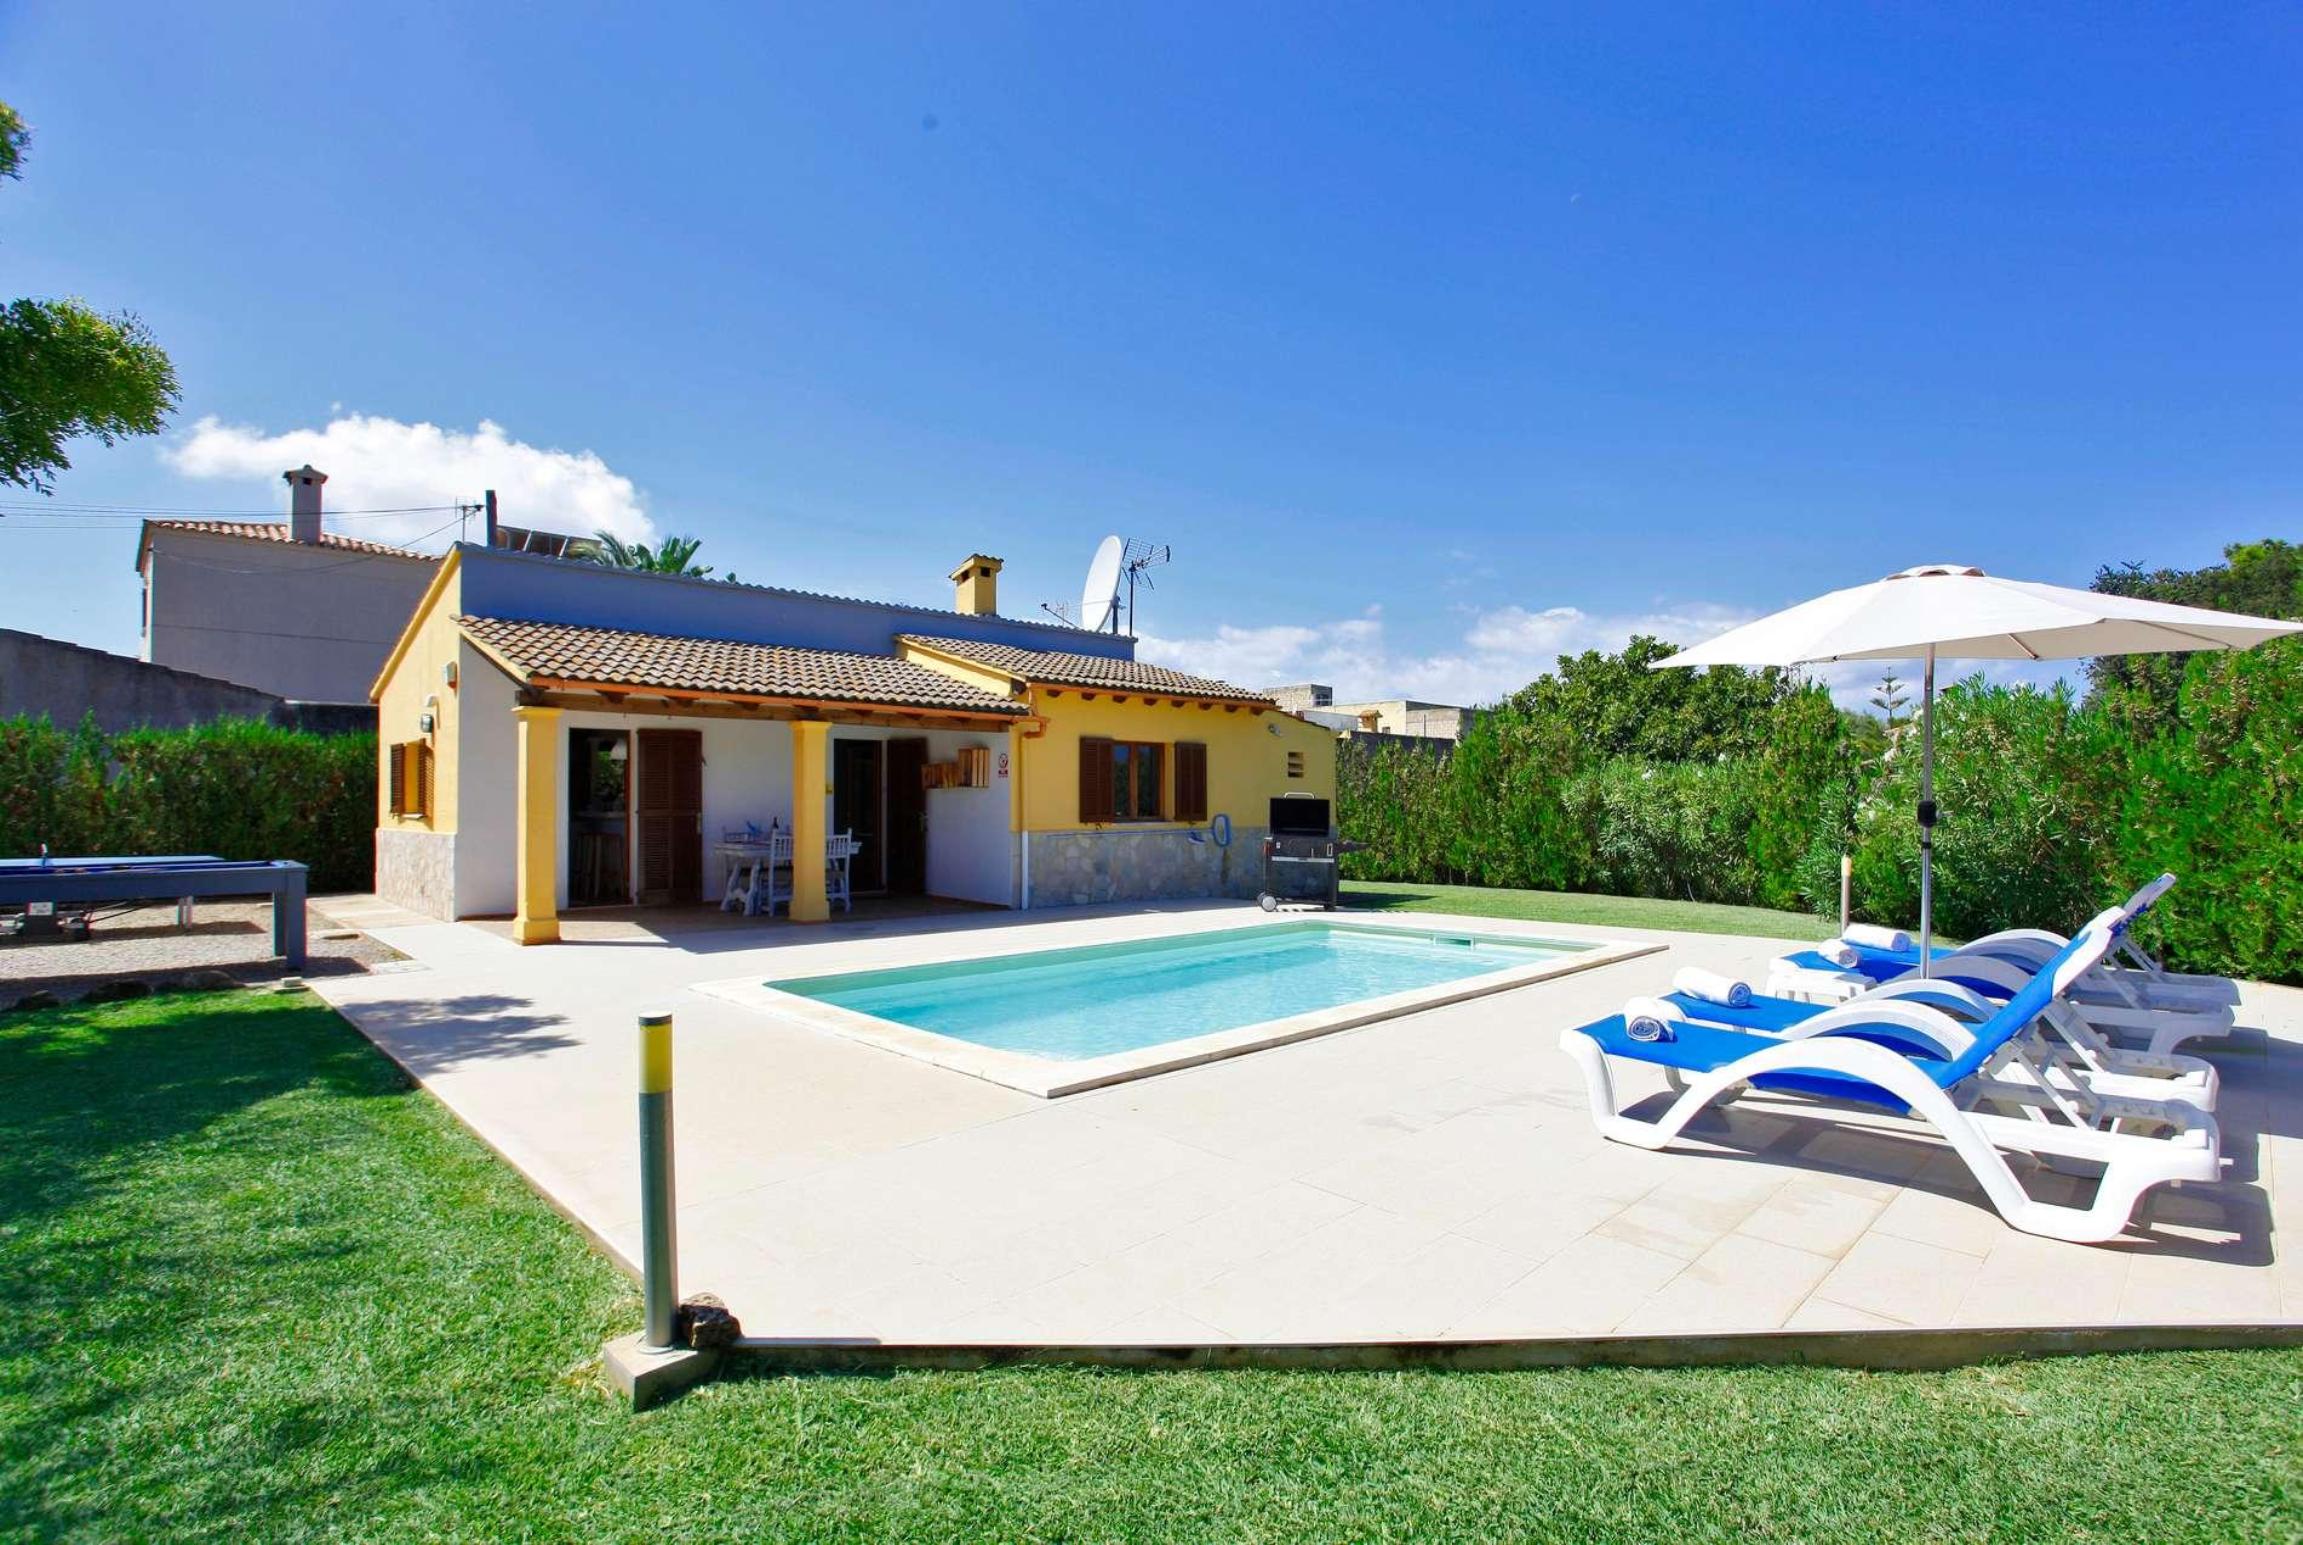 Property Image 1 - Bungalow style villa with private pool.